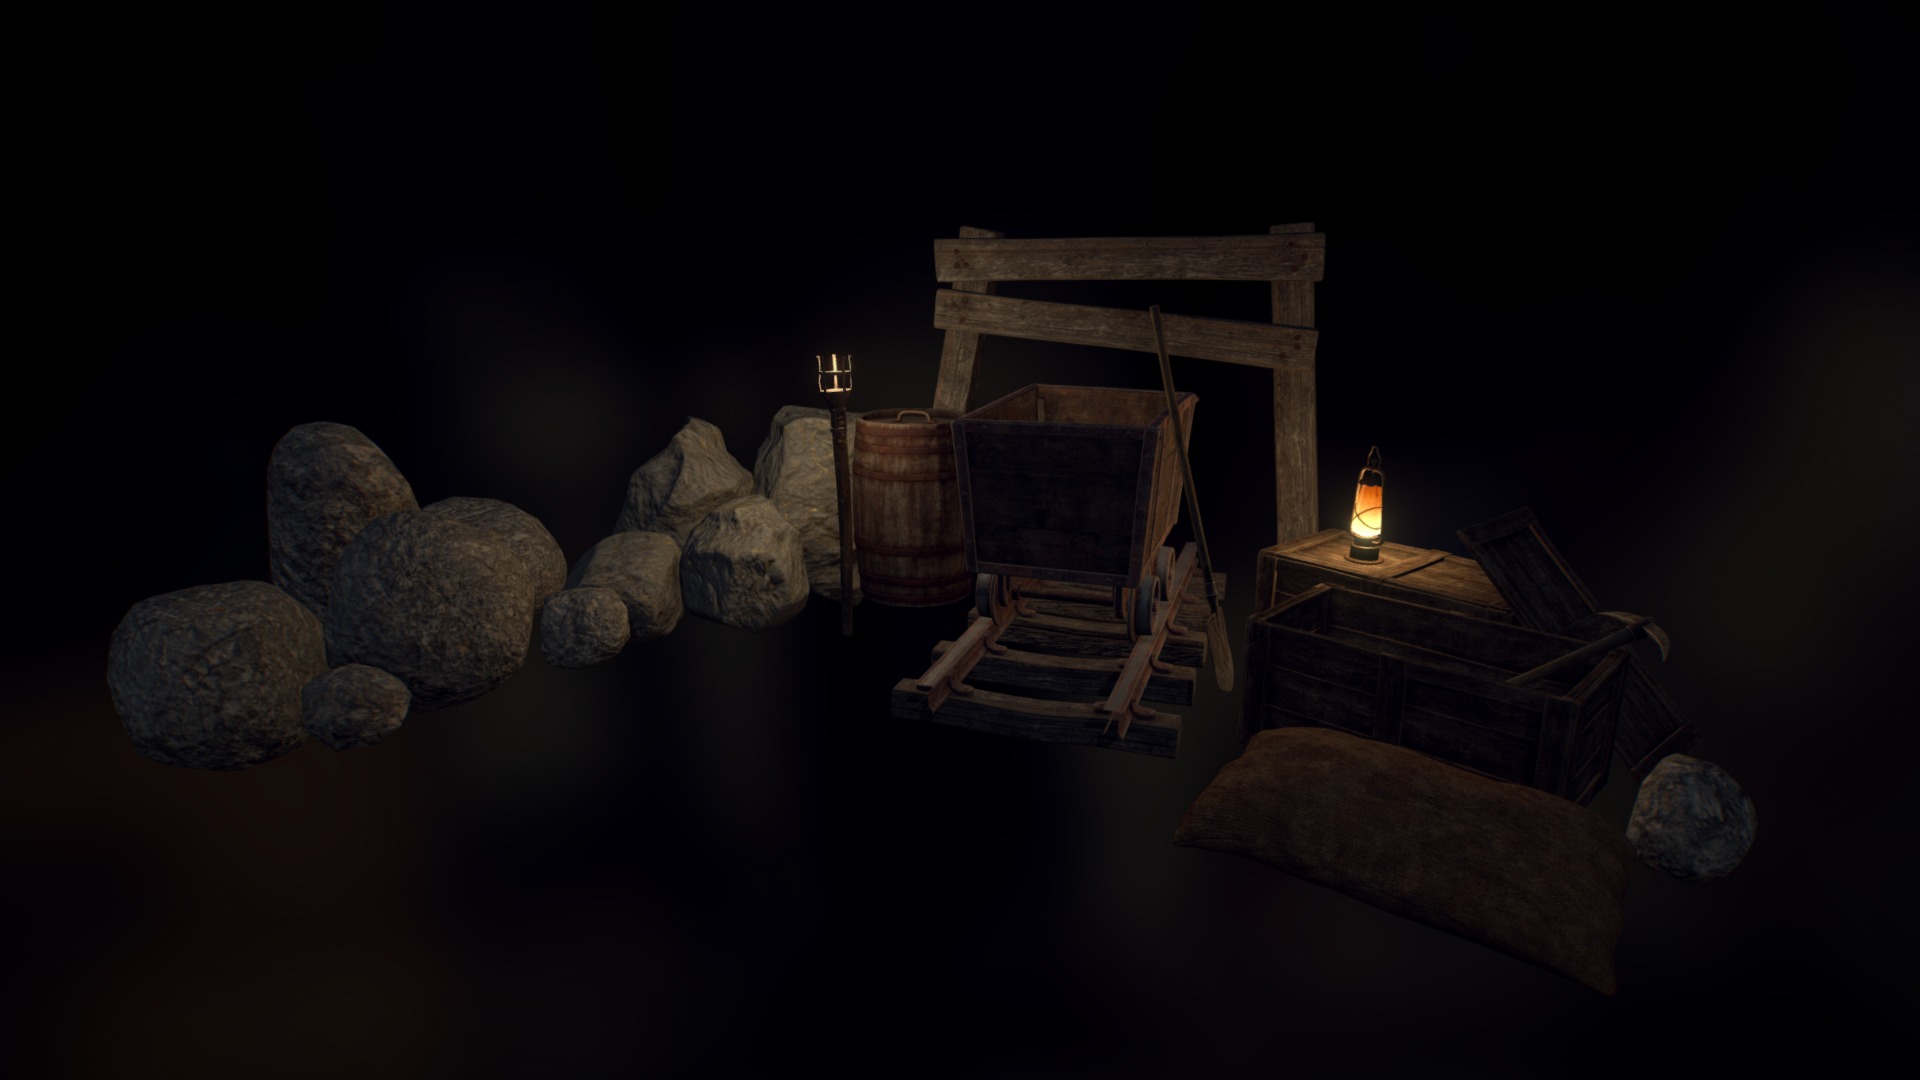 3D model Mines Props Pack - This is a 3D model of the Mines Props Pack. The 3D model is about a wooden structure with a light inside.